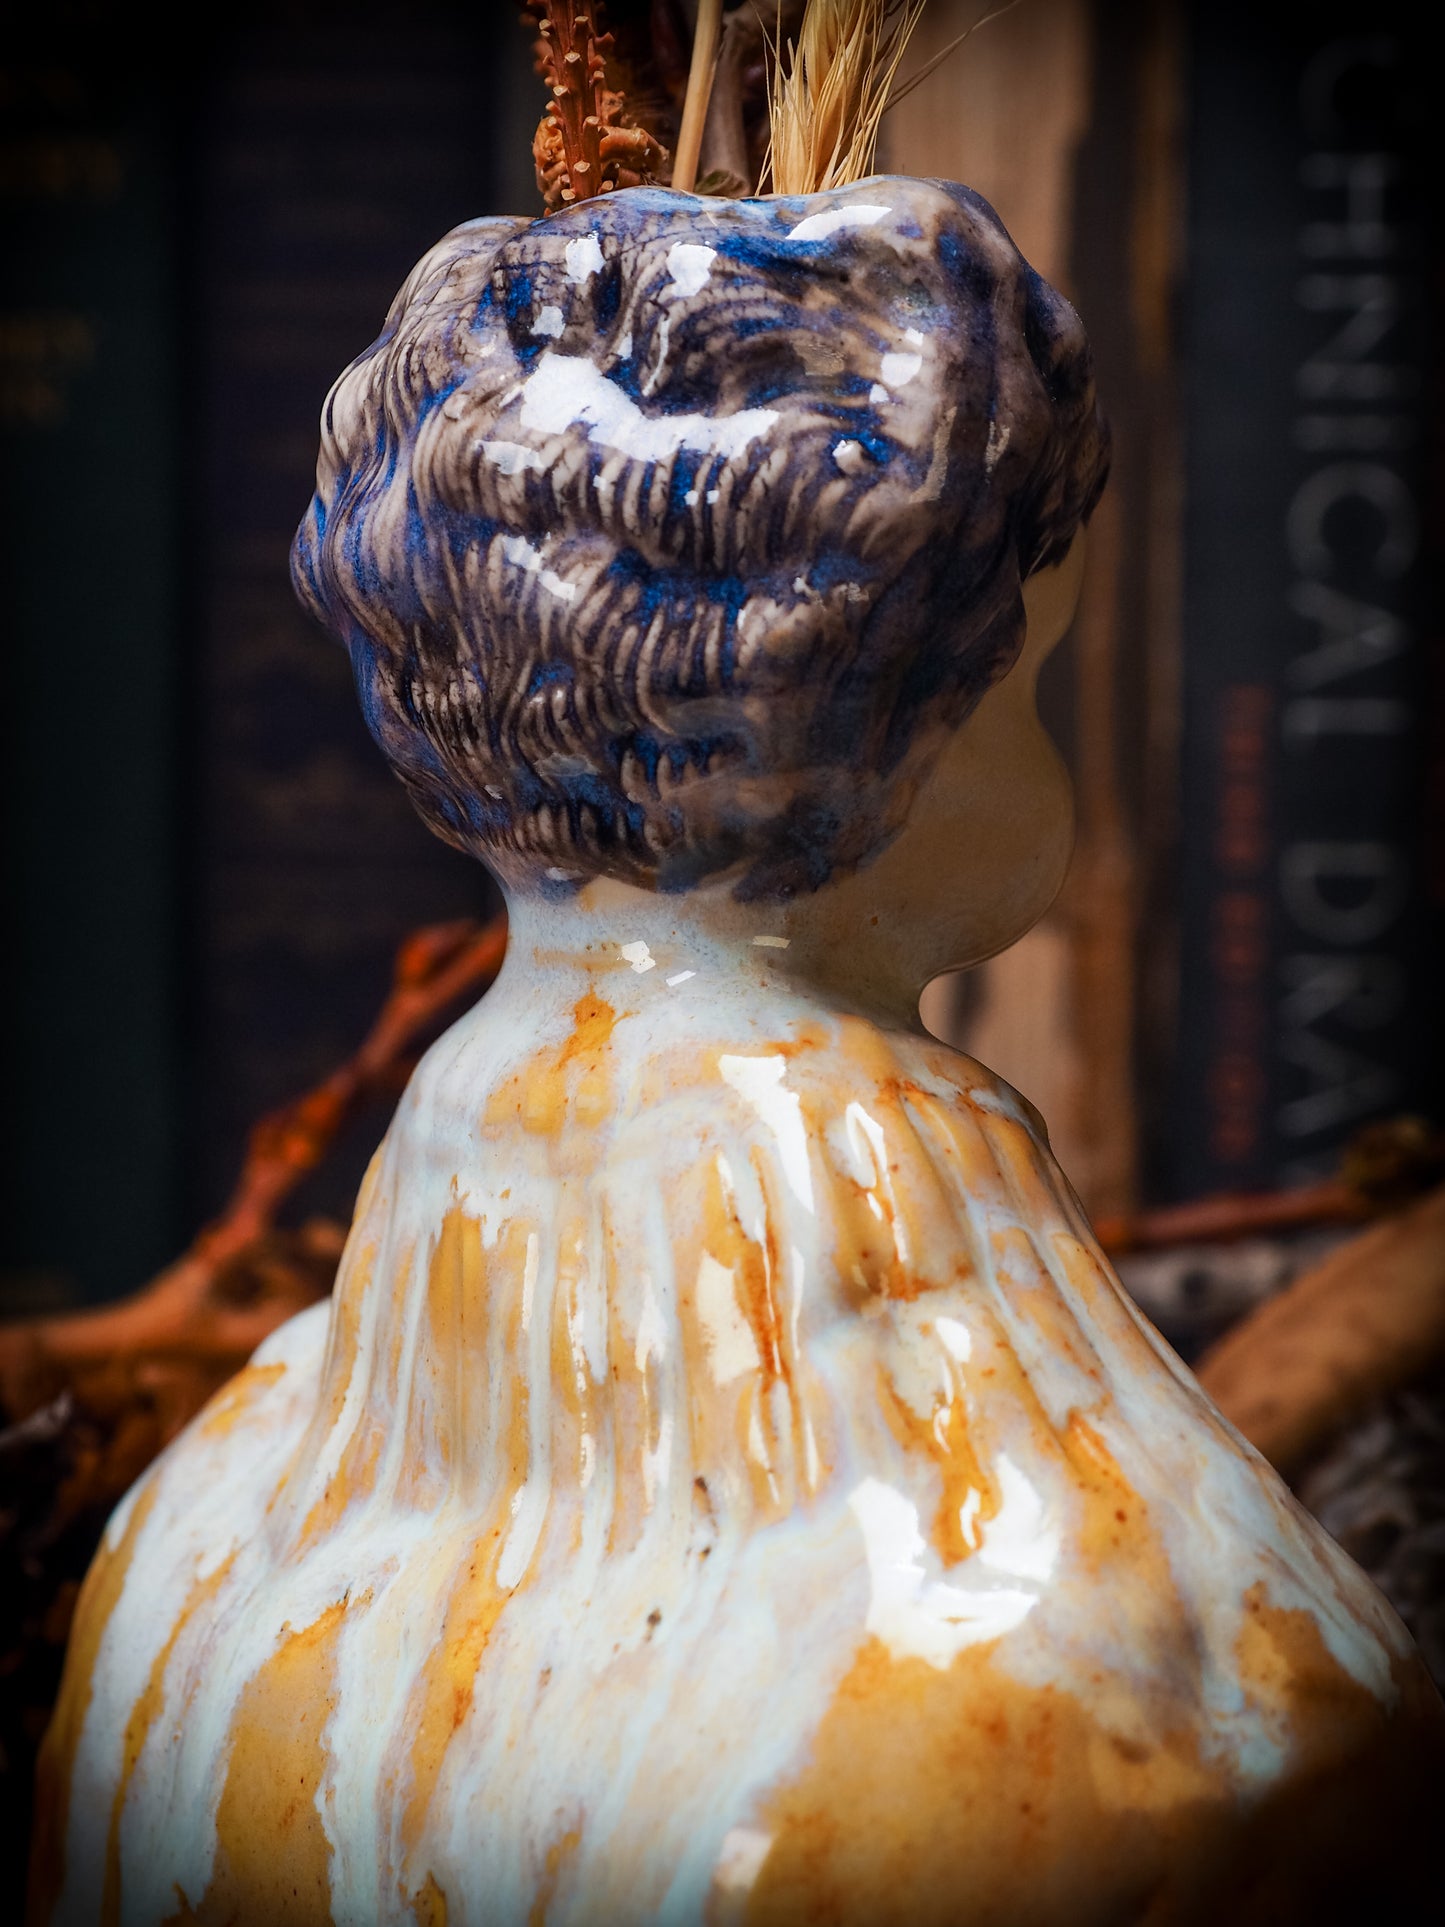 Original handmade ceramic flower vase,  artist brush and pencil holder by Idania Salcido, Danita Art. A honeycomb bee shaped statue with china doll head. Handmade touch to any artist's studio with handmade glazed ceramic good for watercolors acrylics inks and oil paints. Clean with water or mineral spirits.